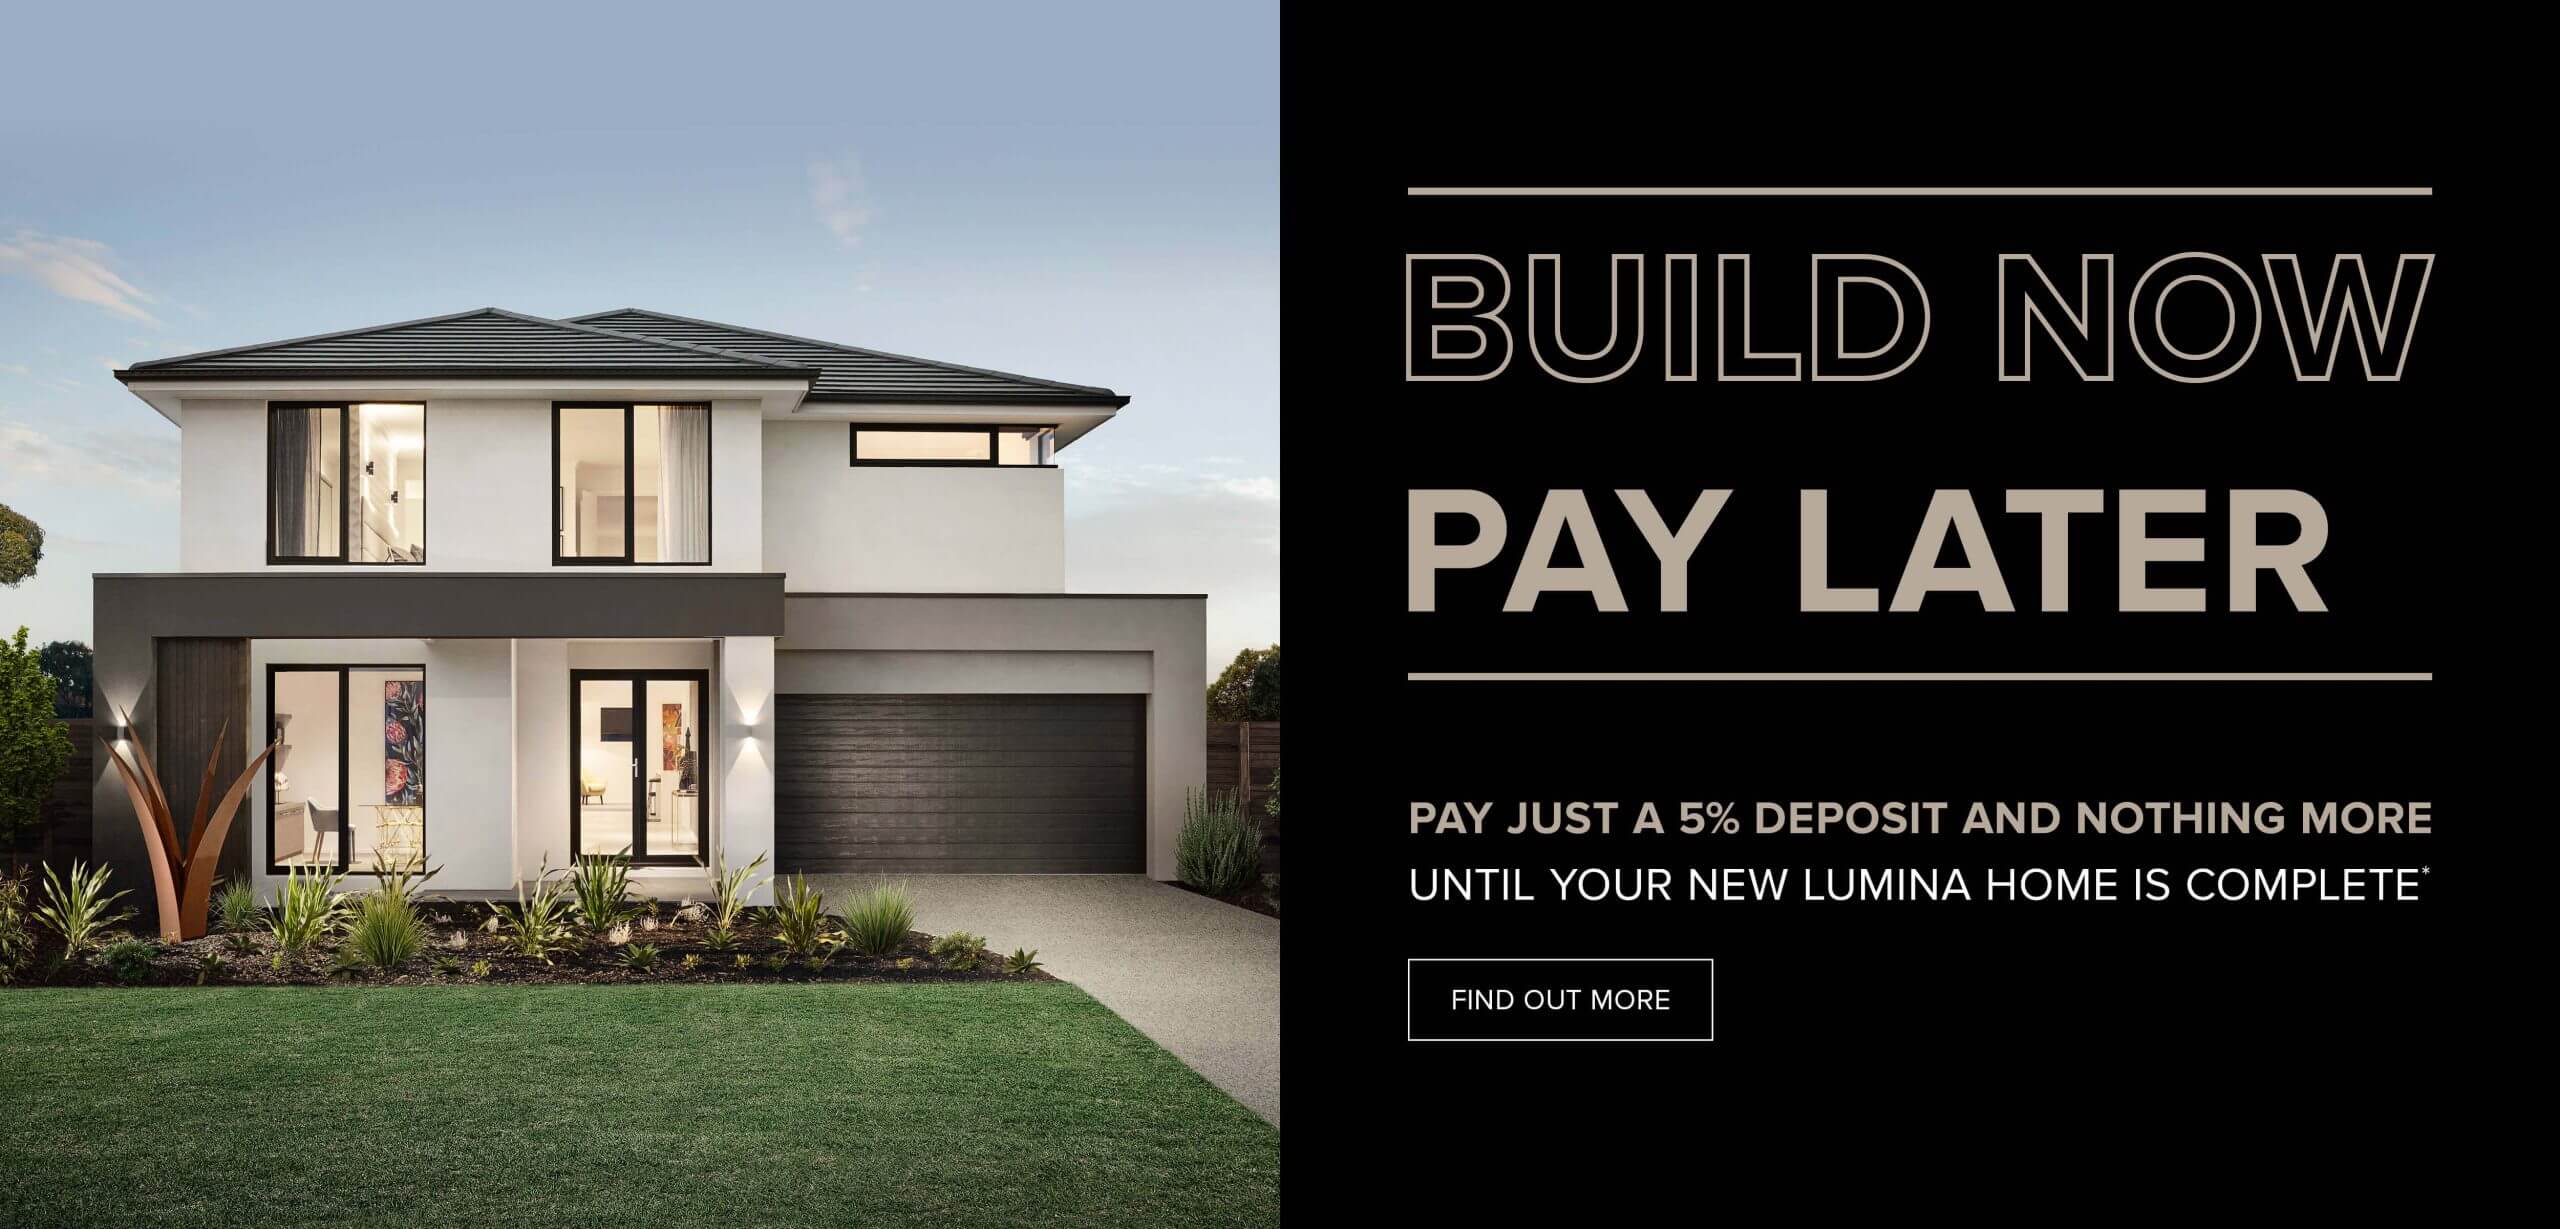 Home Builder in Melbourne. Build Now Pay Later